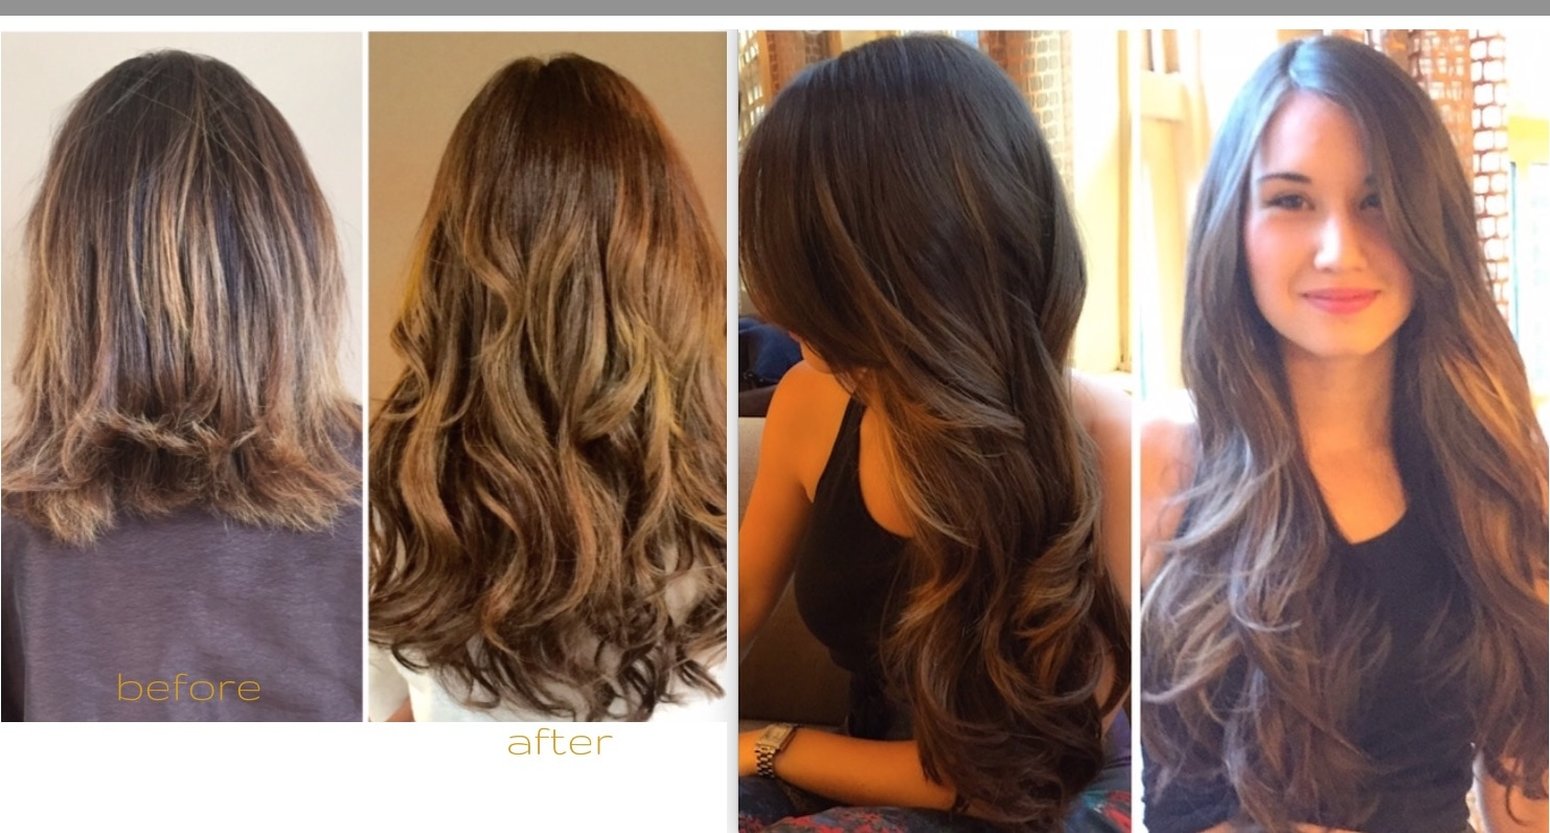 NYC hair extensions